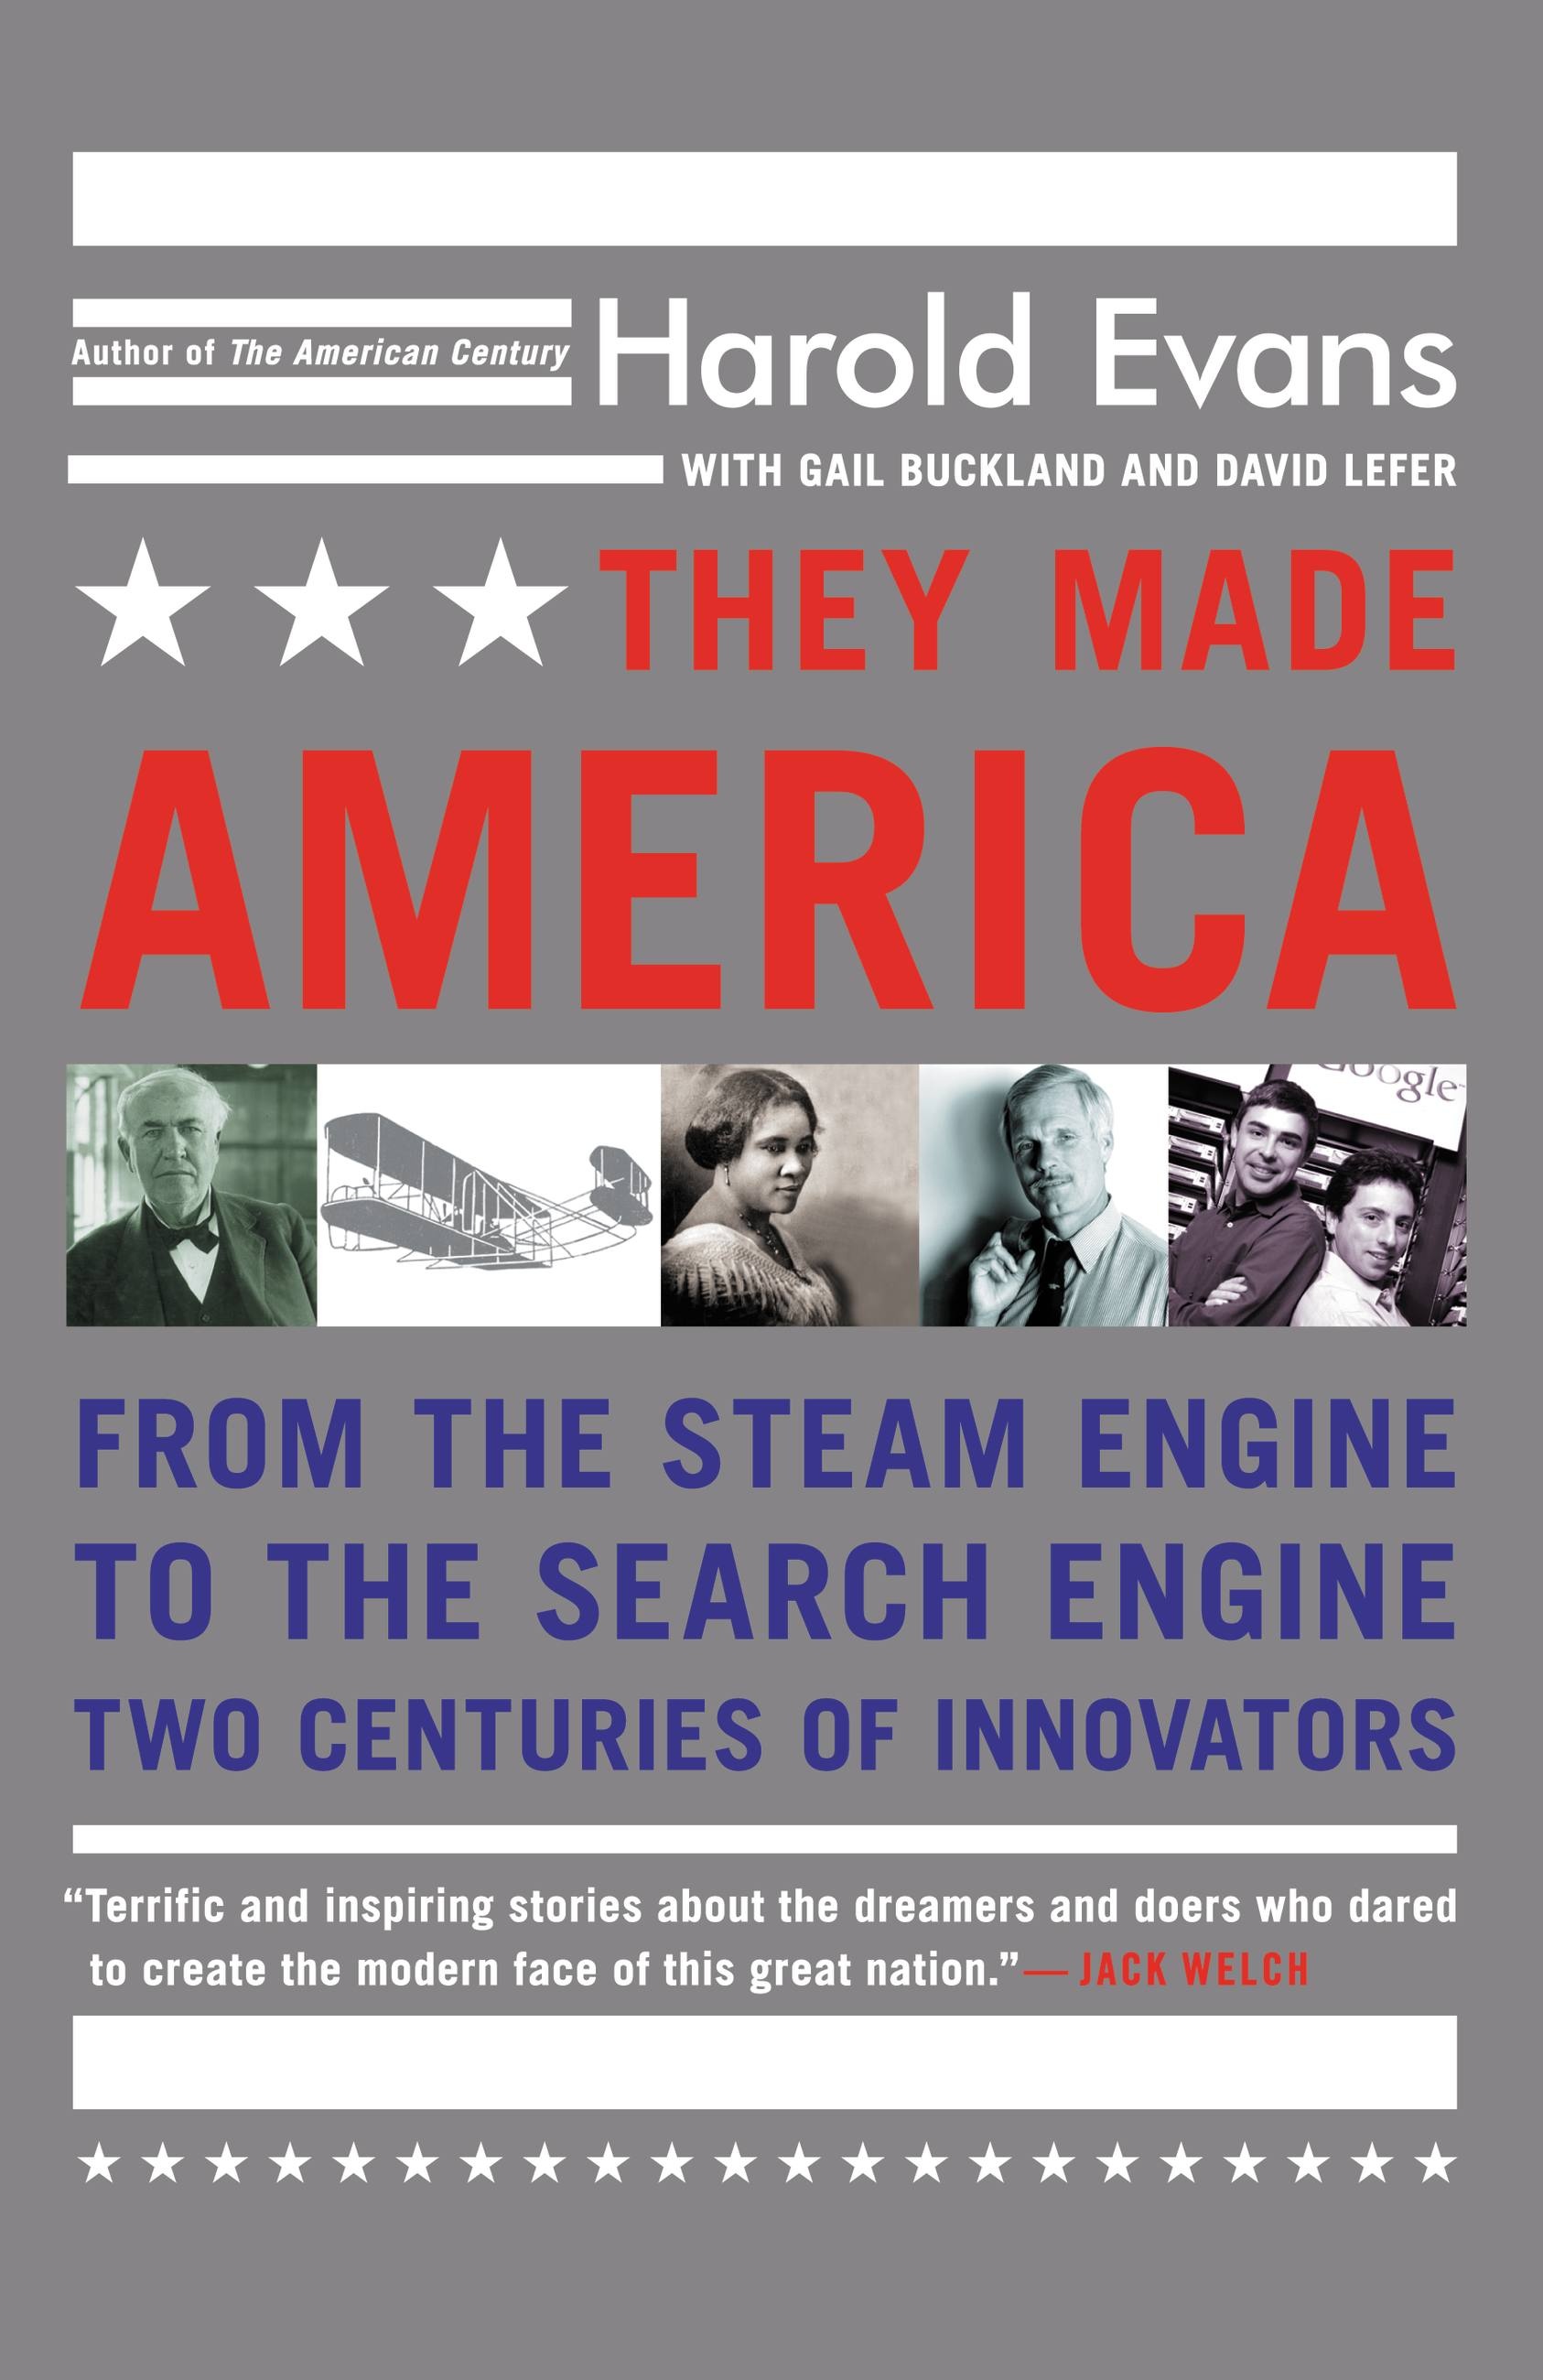 Book　America　They　Hachette　Group　David　by　Made　Lefer